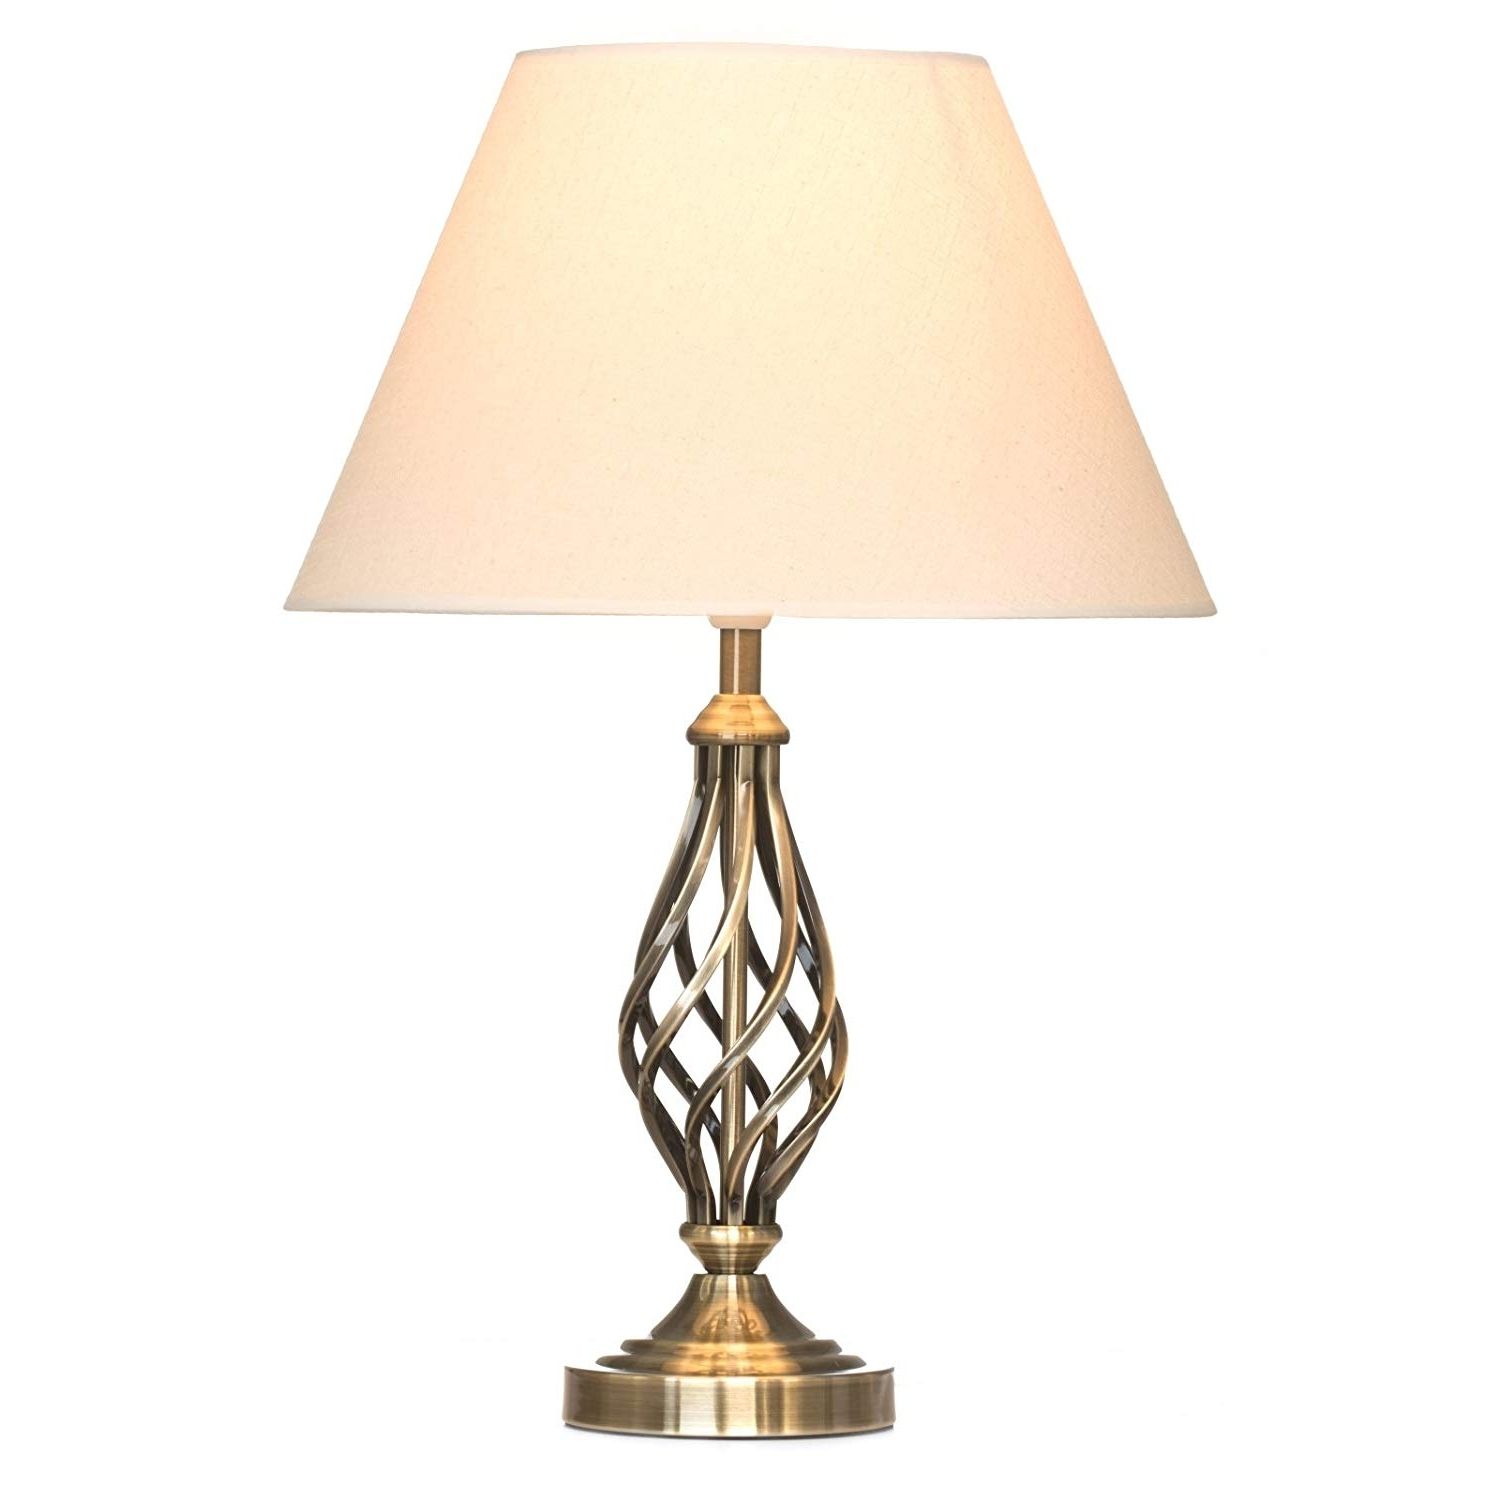 Most Recent Traditional Table Lamps For Living Room For Kingswood Barley Twist Traditional Table Lamp Antique Brass (View 20 of 20)